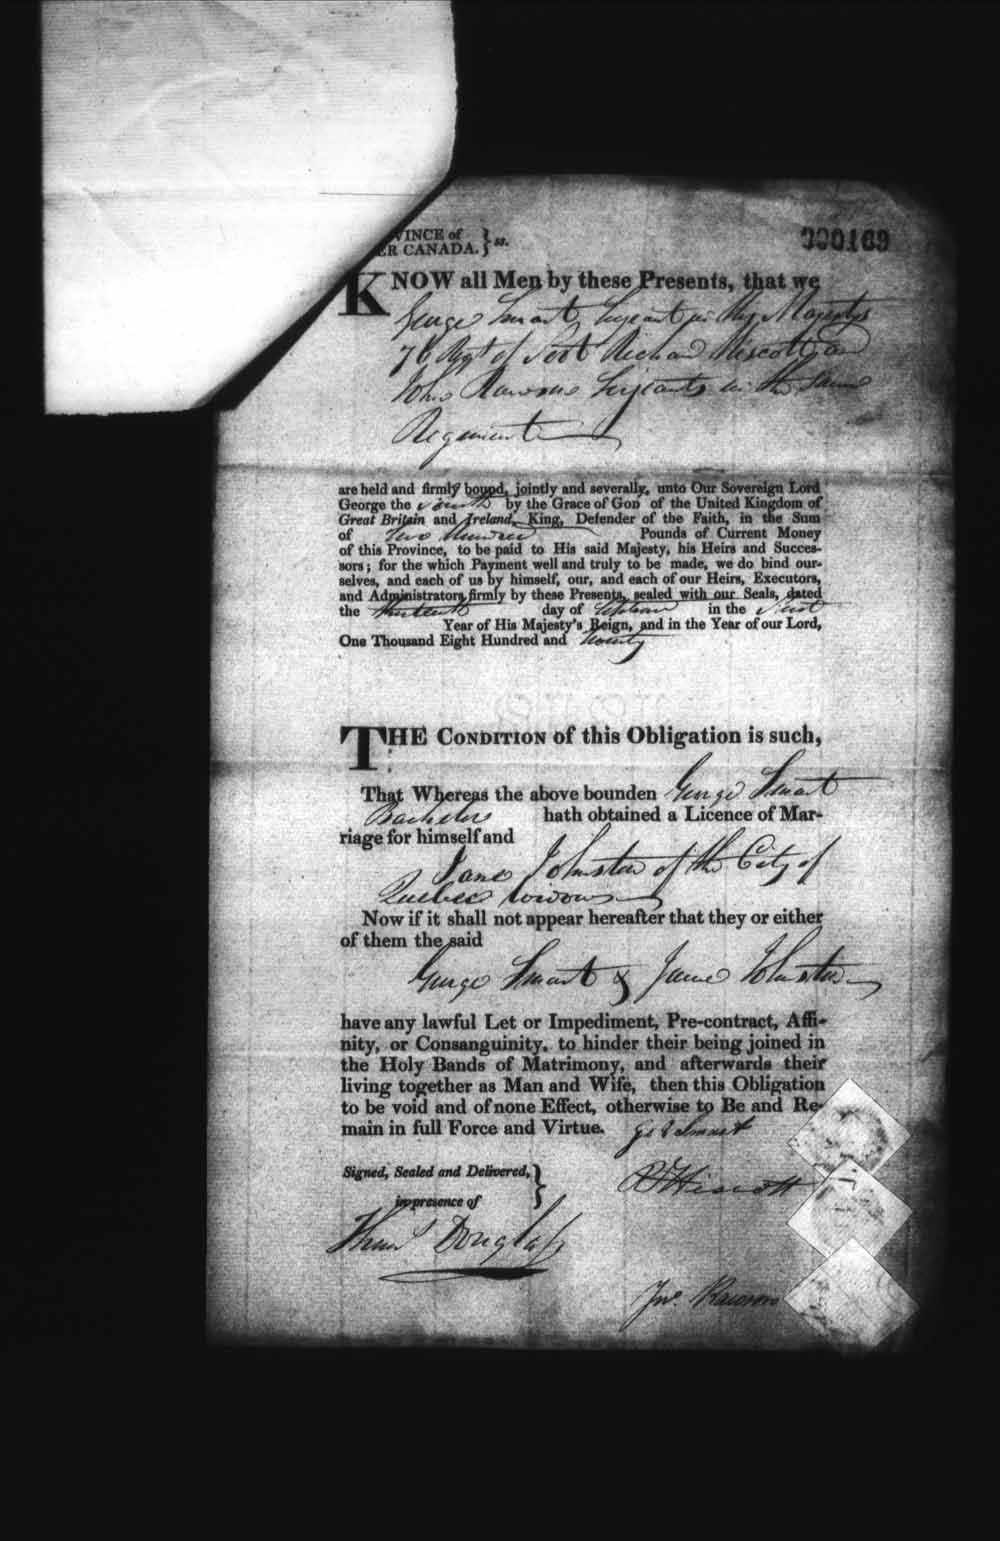 Digitized page of Upper and Lower Canada Marriage Bonds (1779-1865) for Image No.: e008236014